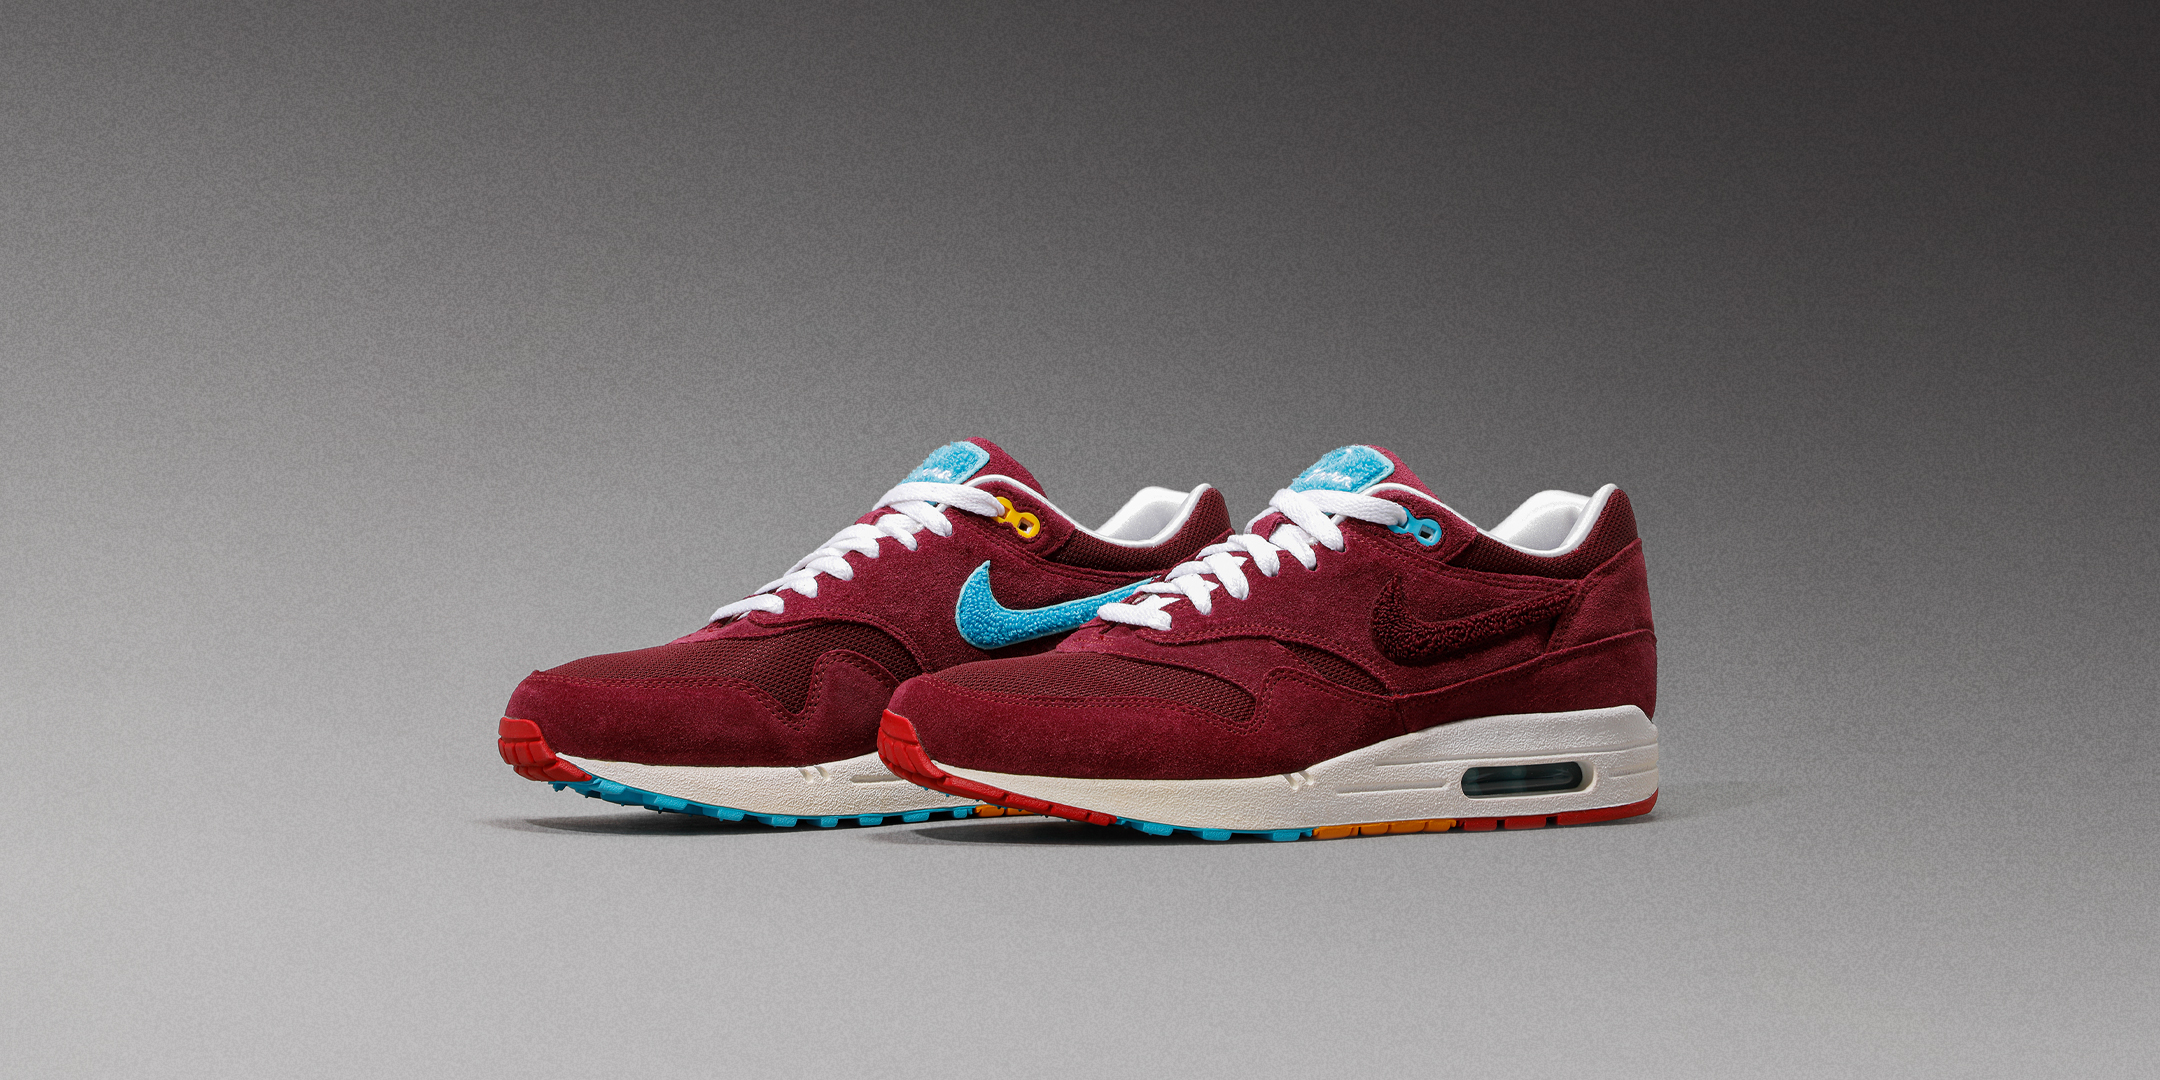 Flight Club on Twitter: "In 2010, Dutch boutique Patta and artist Piet Parra  represented Amsterdam to the fullest with the Air Max 1 Premium 'Cherrywood.'  The sneaker dons a red suede and